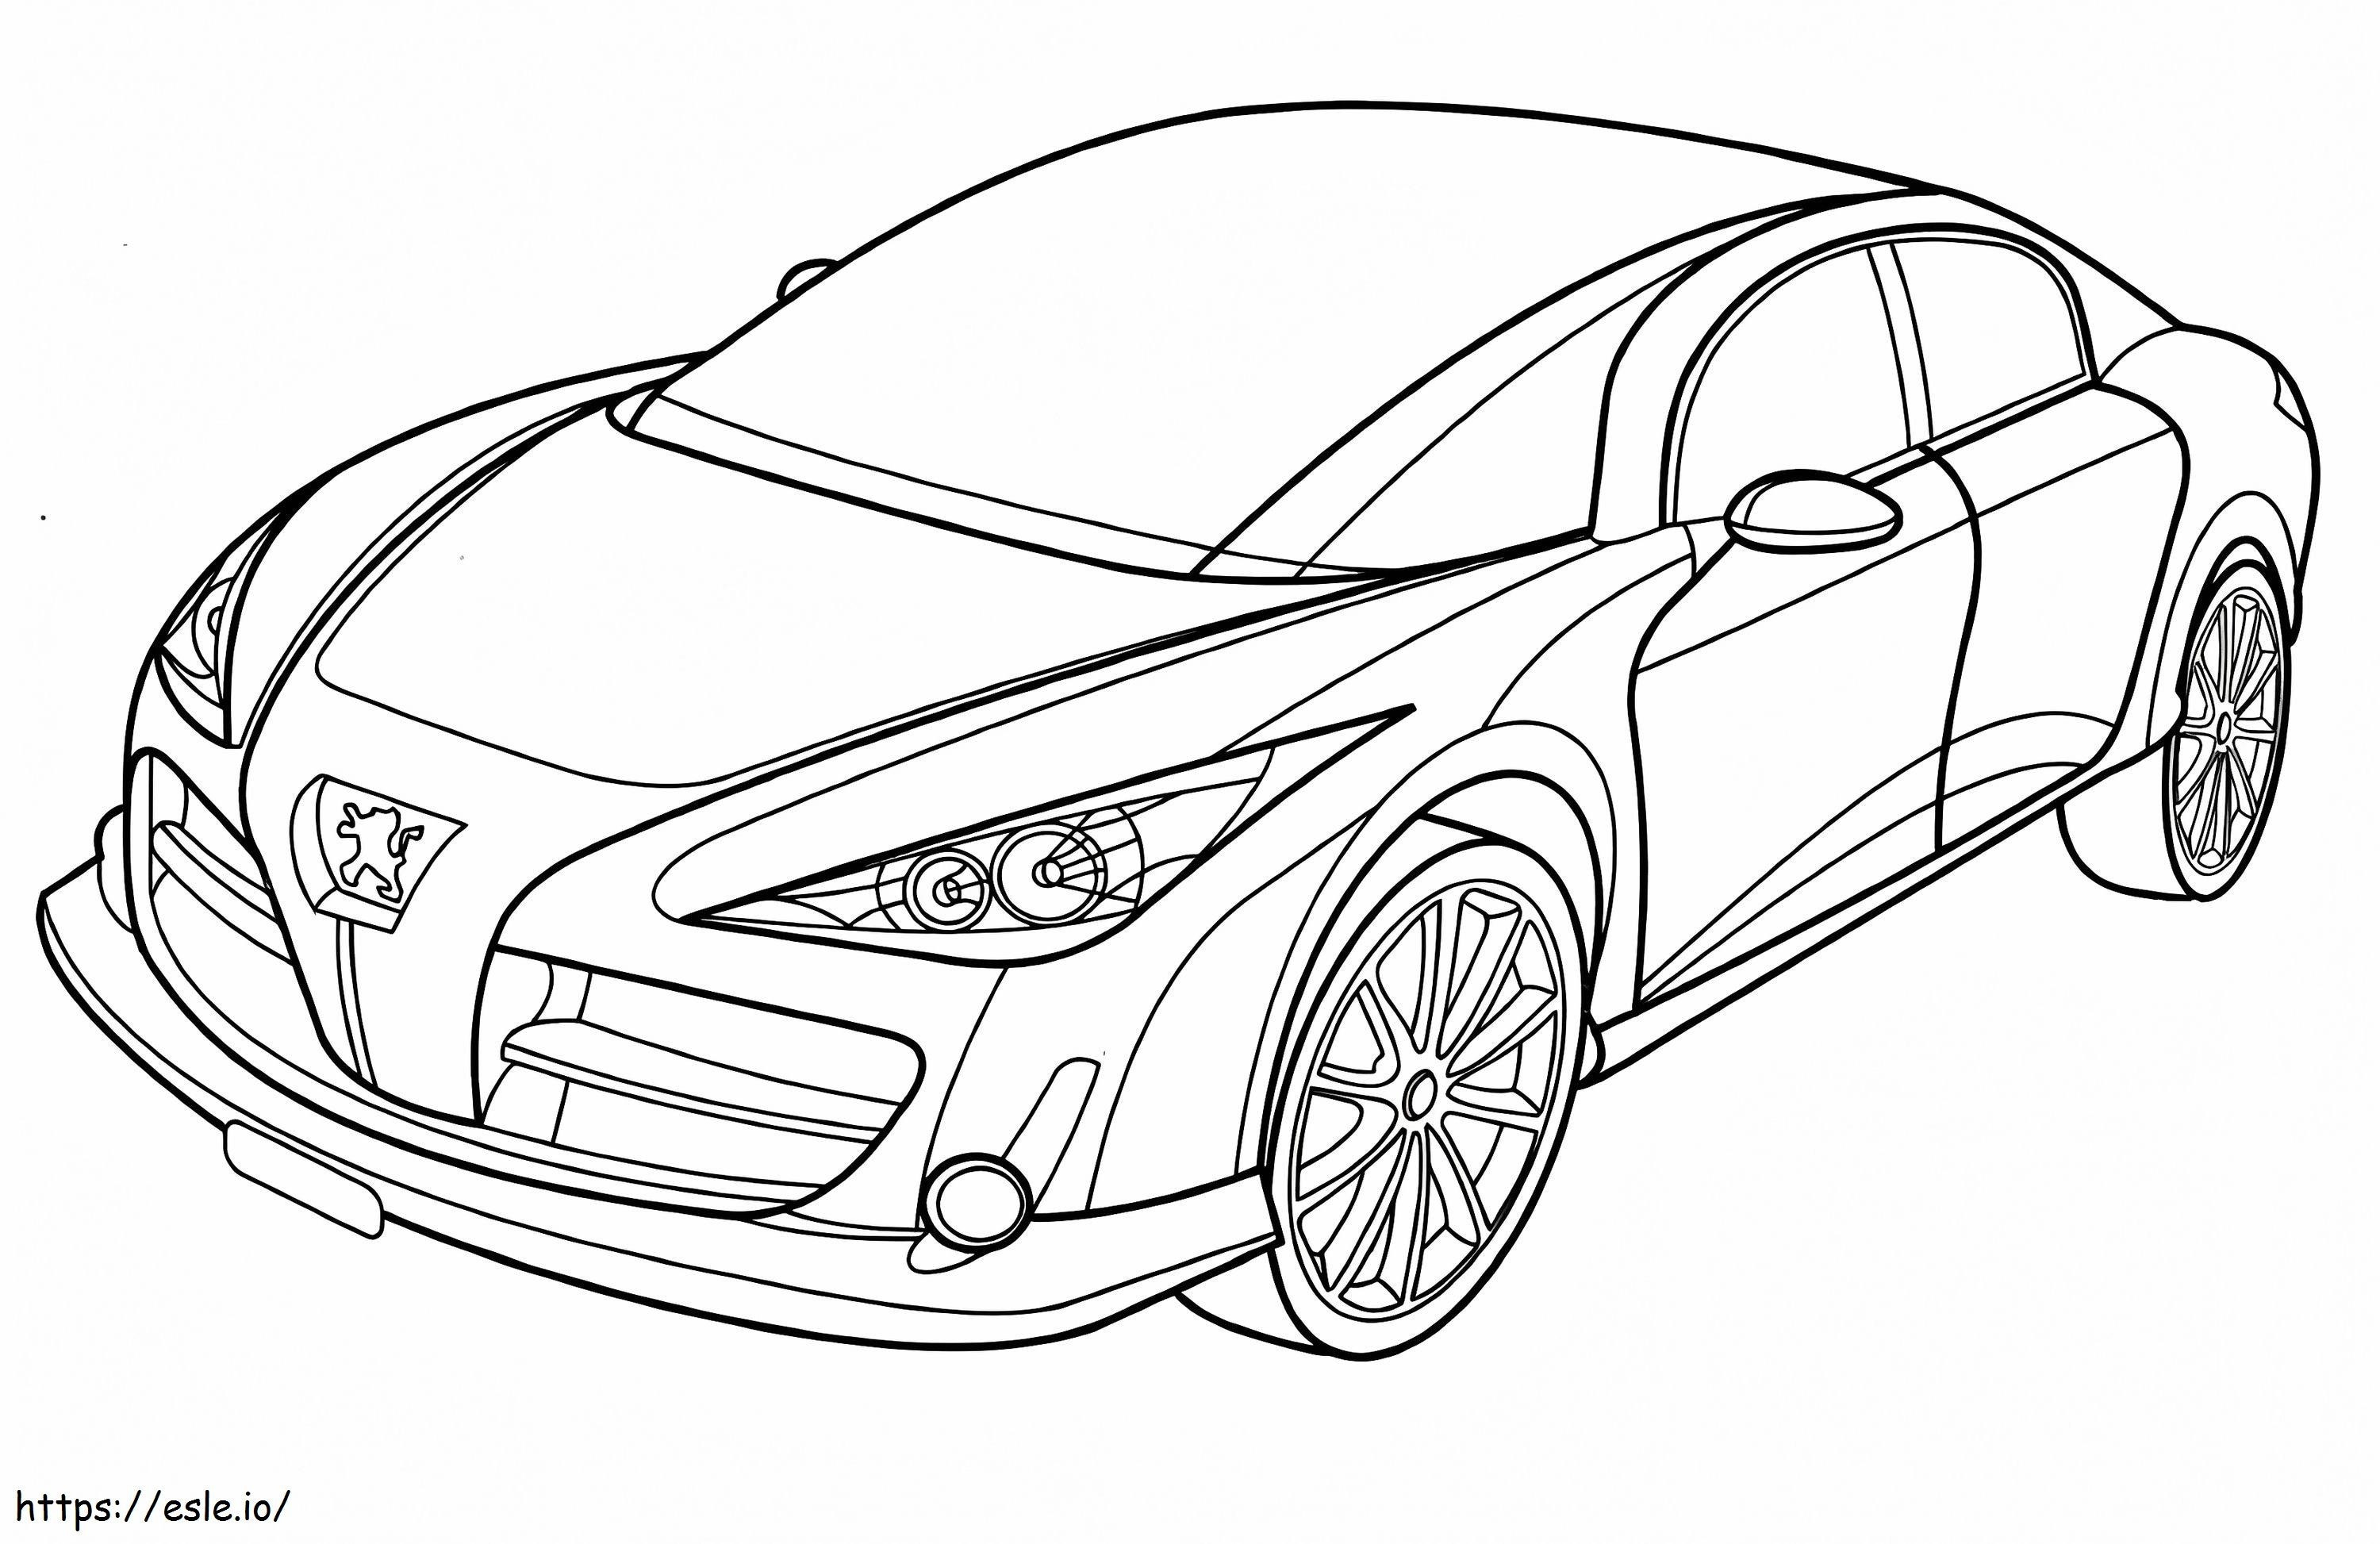 1560496261 Peugeot A4 coloring page